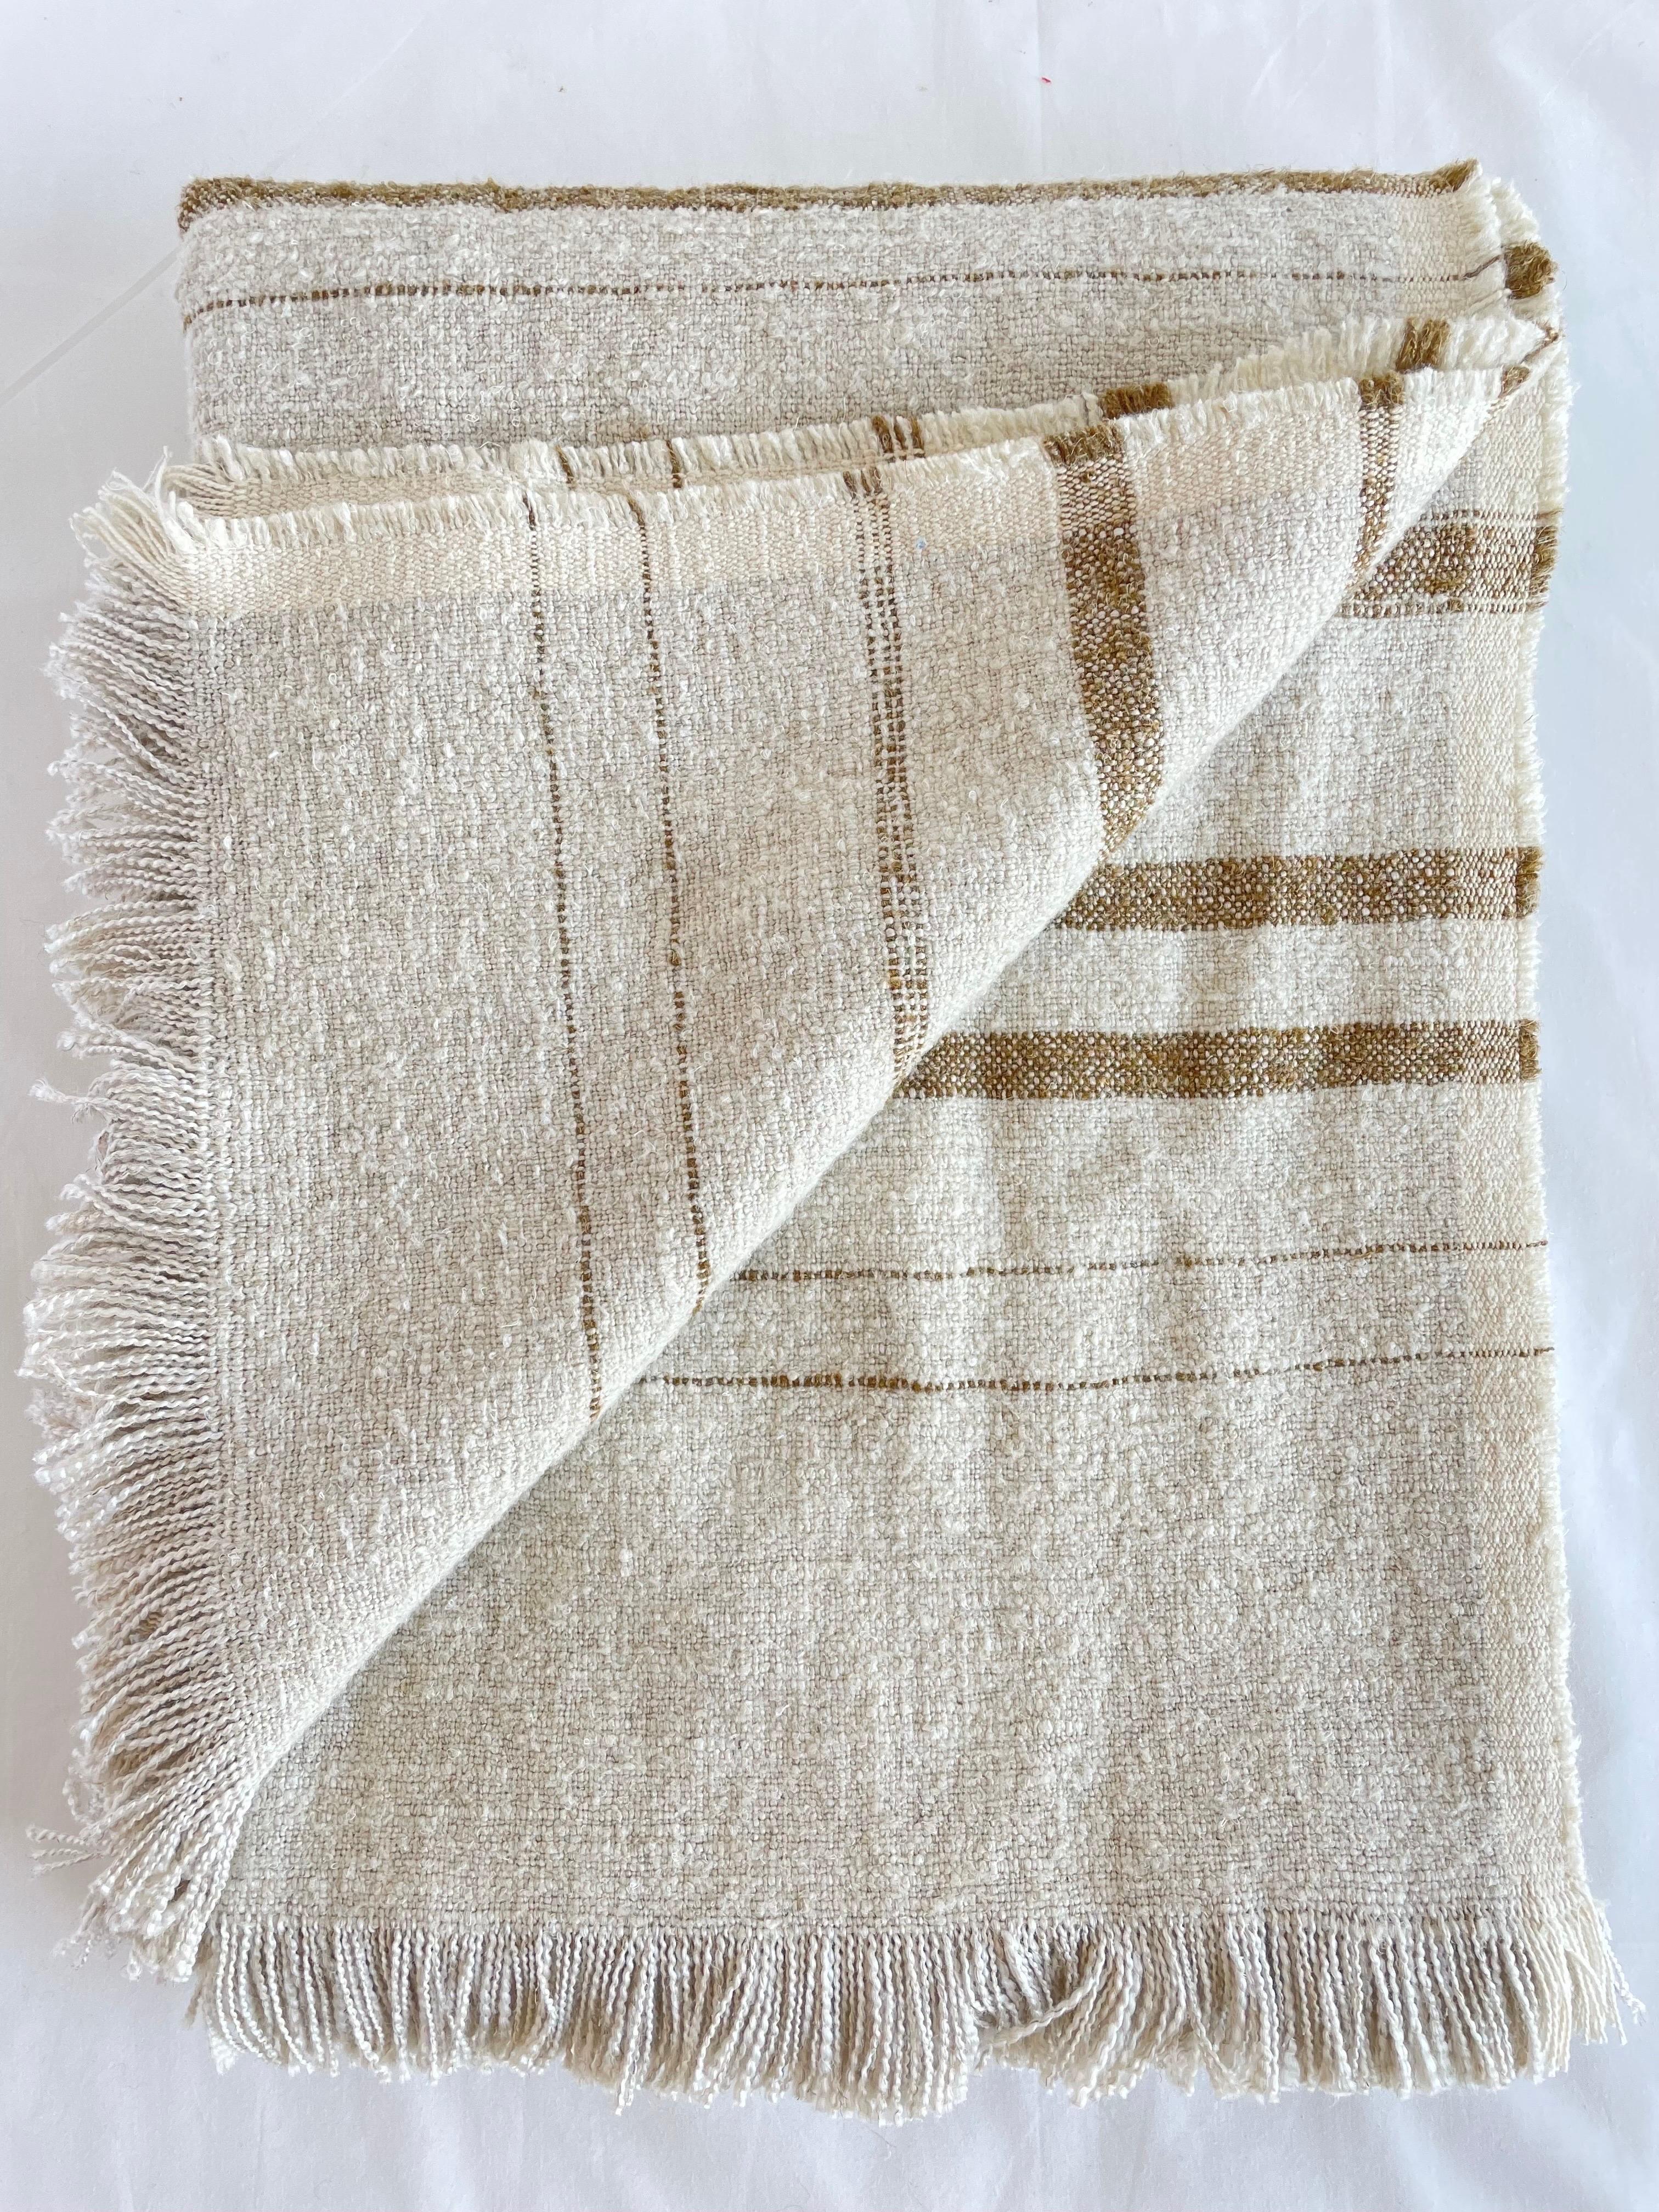 Bloom Home Inc Belgian Linen and Cotton Throw In New Condition For Sale In Brea, CA